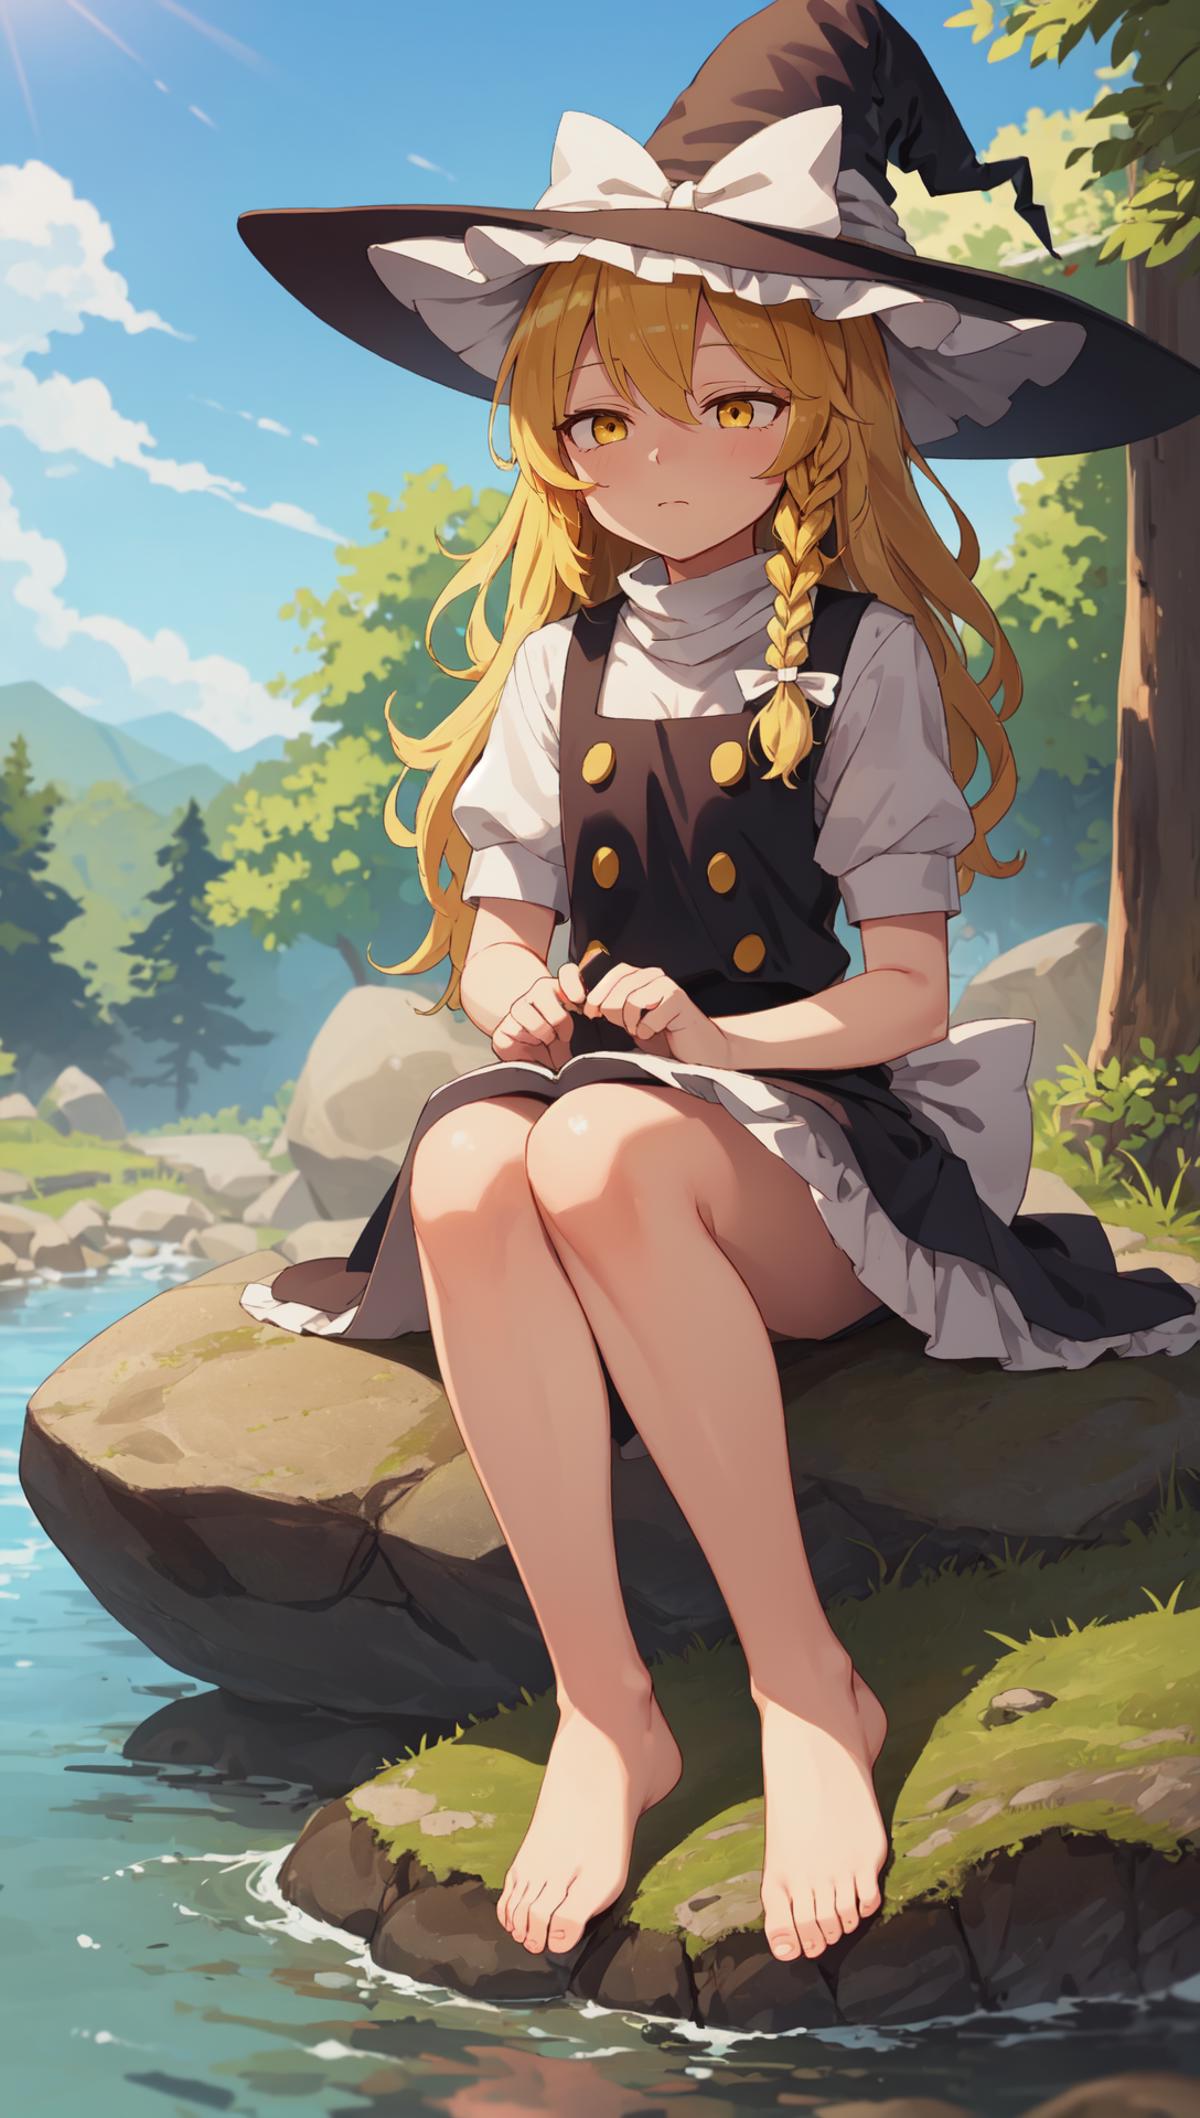 Cartoon Illustration of a Little Girl in a Dress and White Apron Sitting by Water